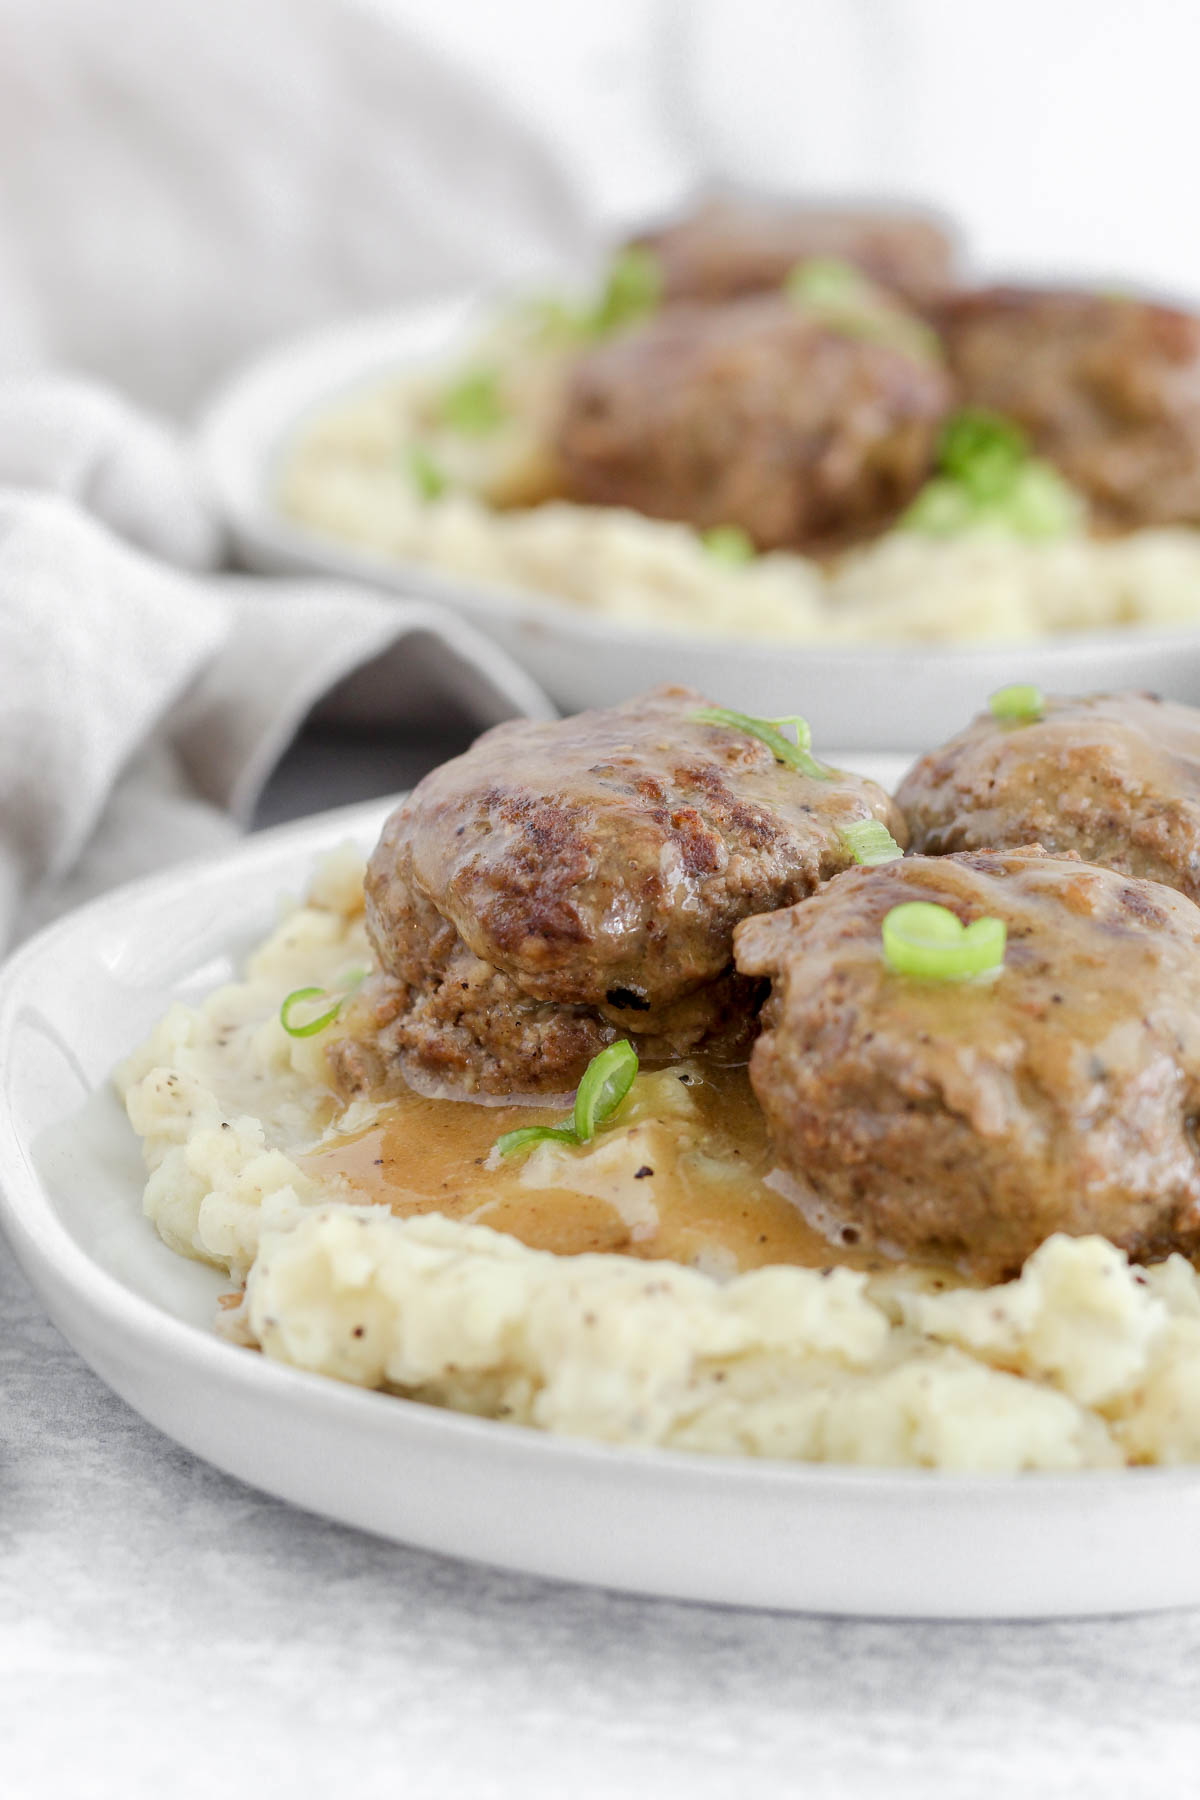 A plate filled with mashed potatoes and Swedish meatballs and gravy on top.